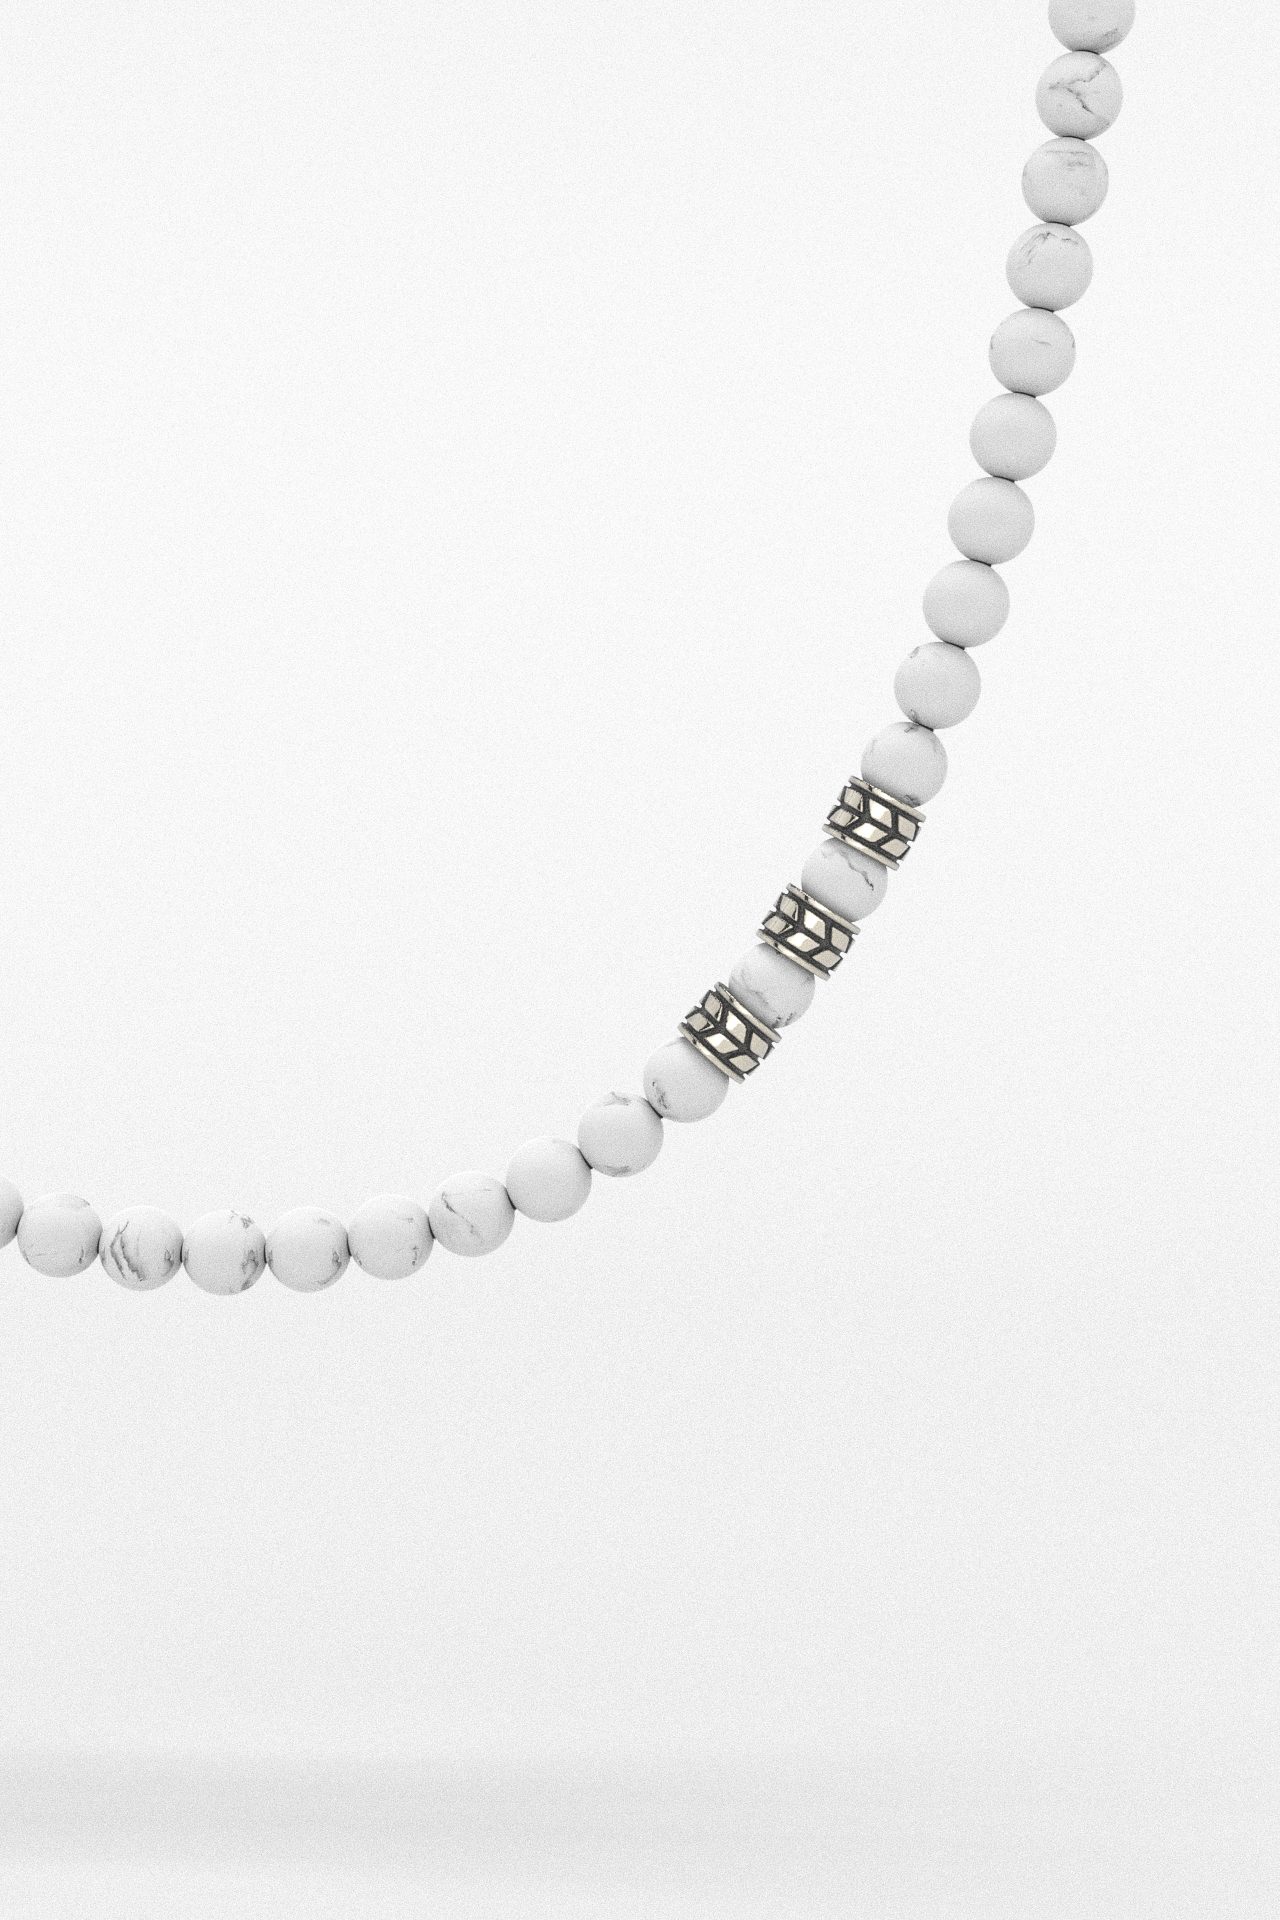 Howlite Necklace 8mm | Royale